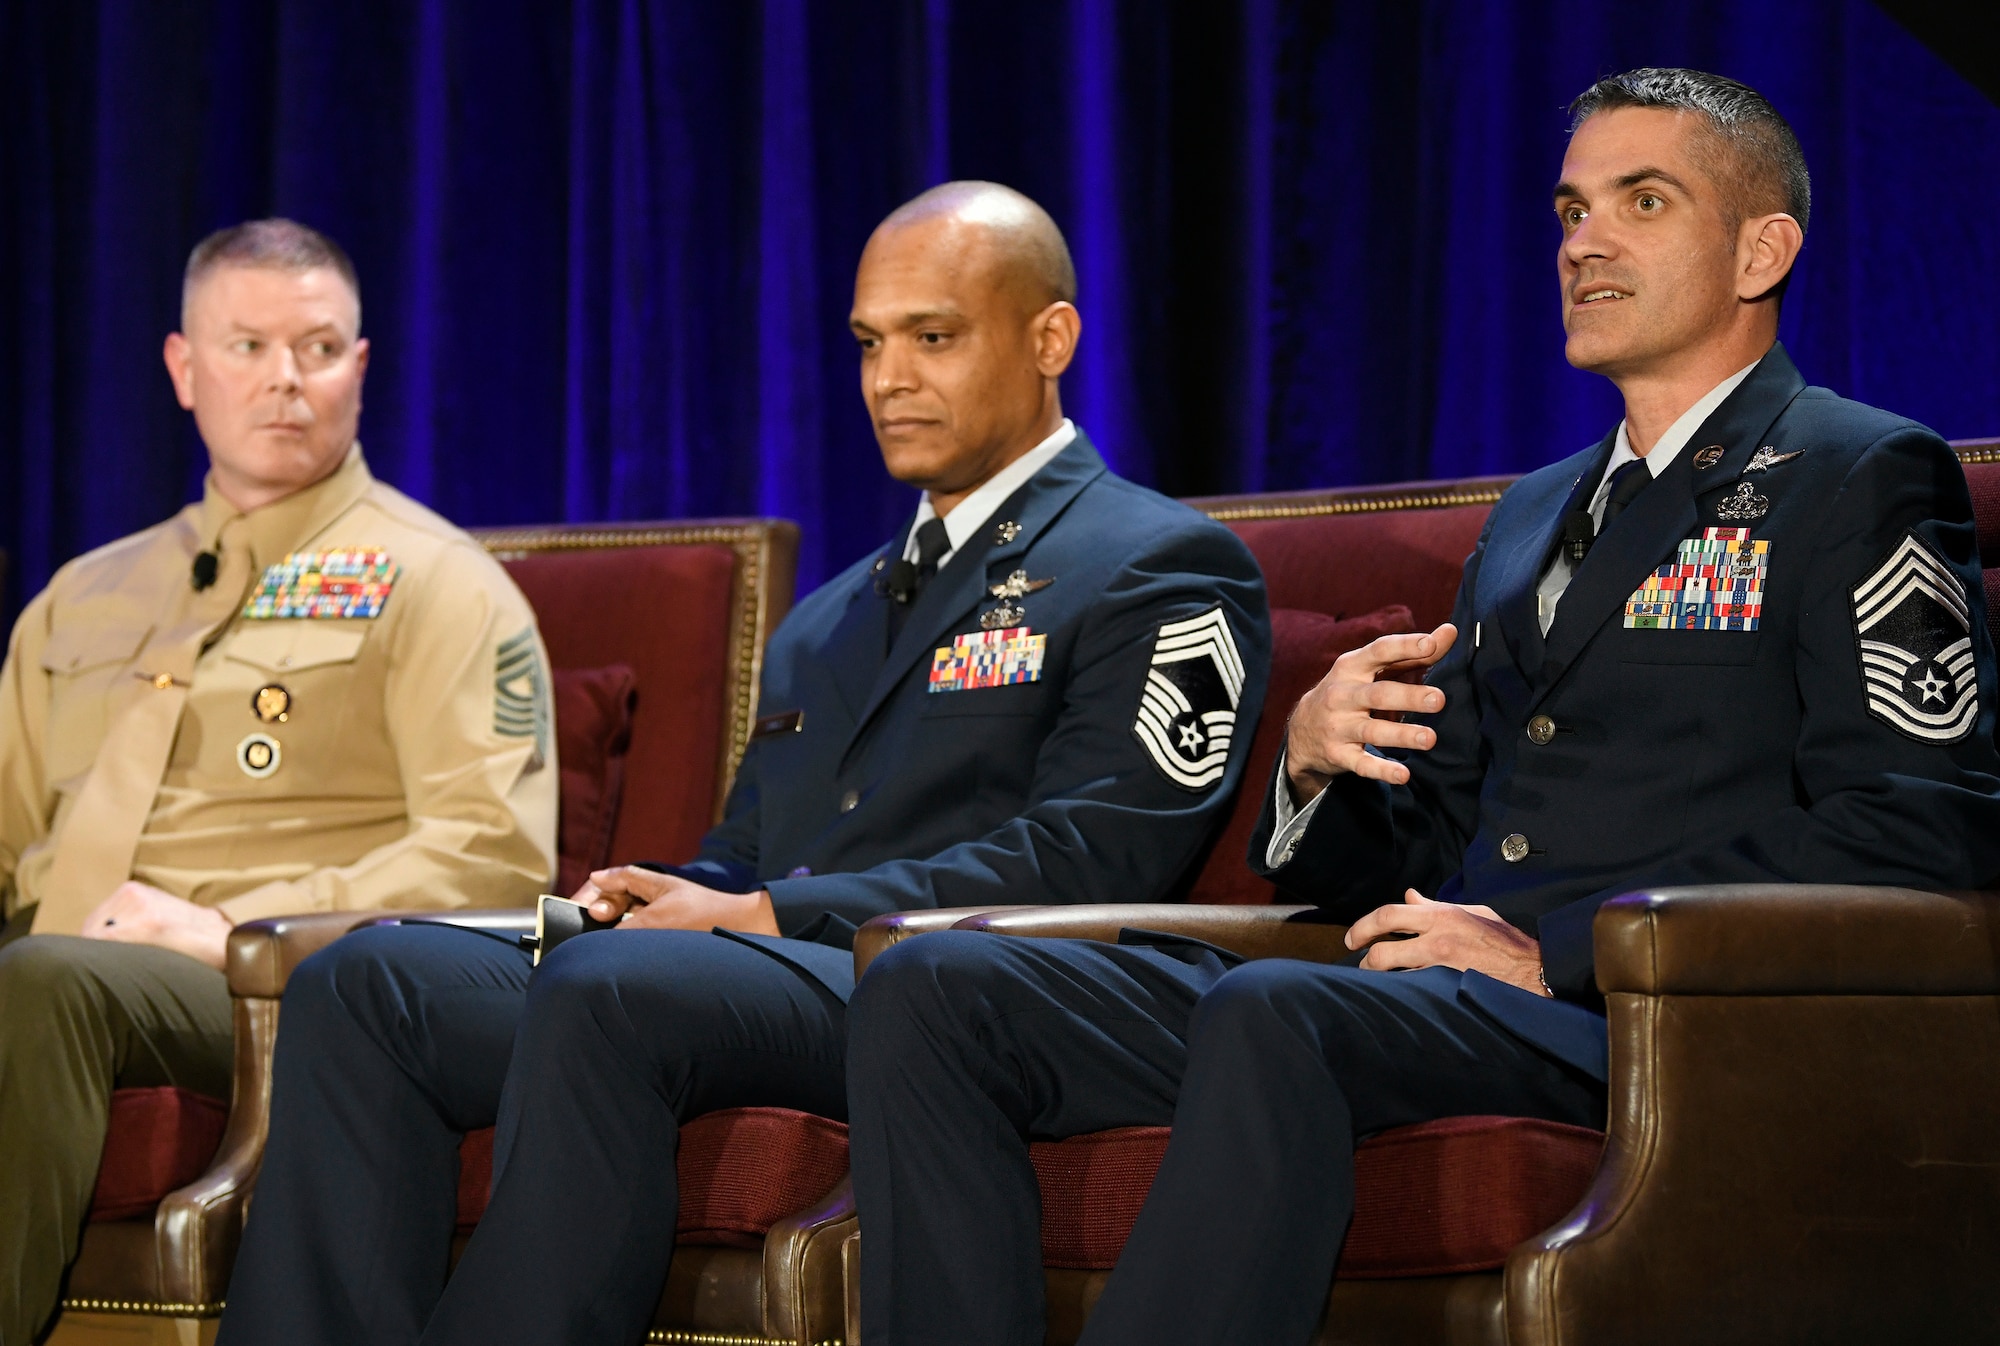 U.S. Air Force Chief Master Sgt. Bryan Neumann (right), Sixteenth Air Force Cyberspace Operations superintendent, speaks to Alamo Armed Forces Communication and Engineering Association Chapter Event attendees in San Antonio, Texas, Nov. 20, 2019, as (left to right) U.S. Marine Corps Master Gunnery Sgt. Scott Stalker, command senior enlisted leader of U.S. Cyber Command, and U.S. Air Force Chief Master Sgt. Andrew Small, 67th Cyberspace Operations Group superintendent, listen in. The three sat on an SEL panel during the annual cyber- and technology-focused conference to discuss cyber enlisted matters. (U.S. Air Force photo by Tech. Sgt. R.J. Biermann)